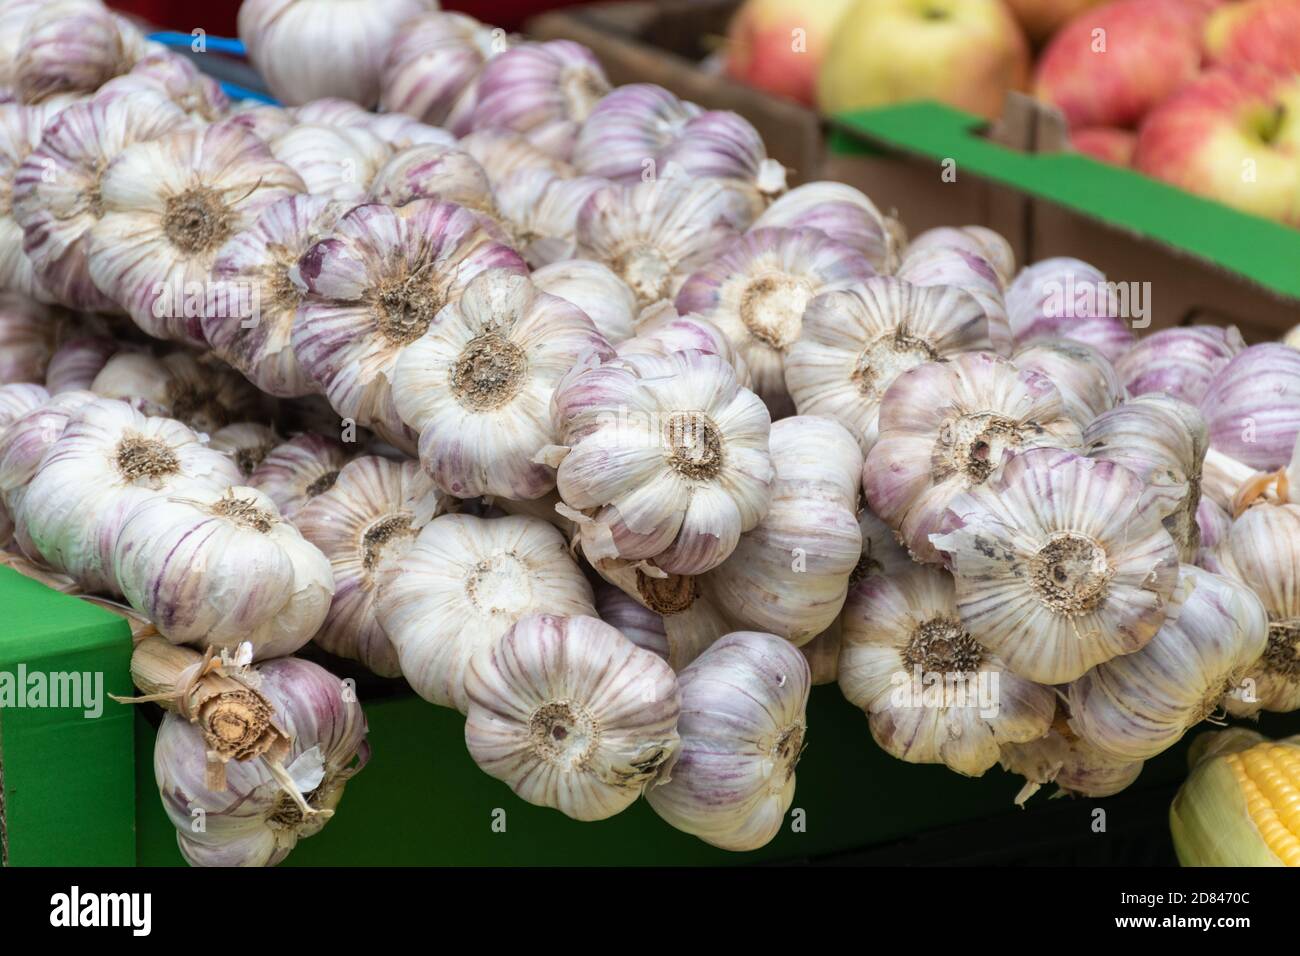 Red garlic hanging on farmer's market stall. White and purple red color heads, bits of roots, stems Stock Photo